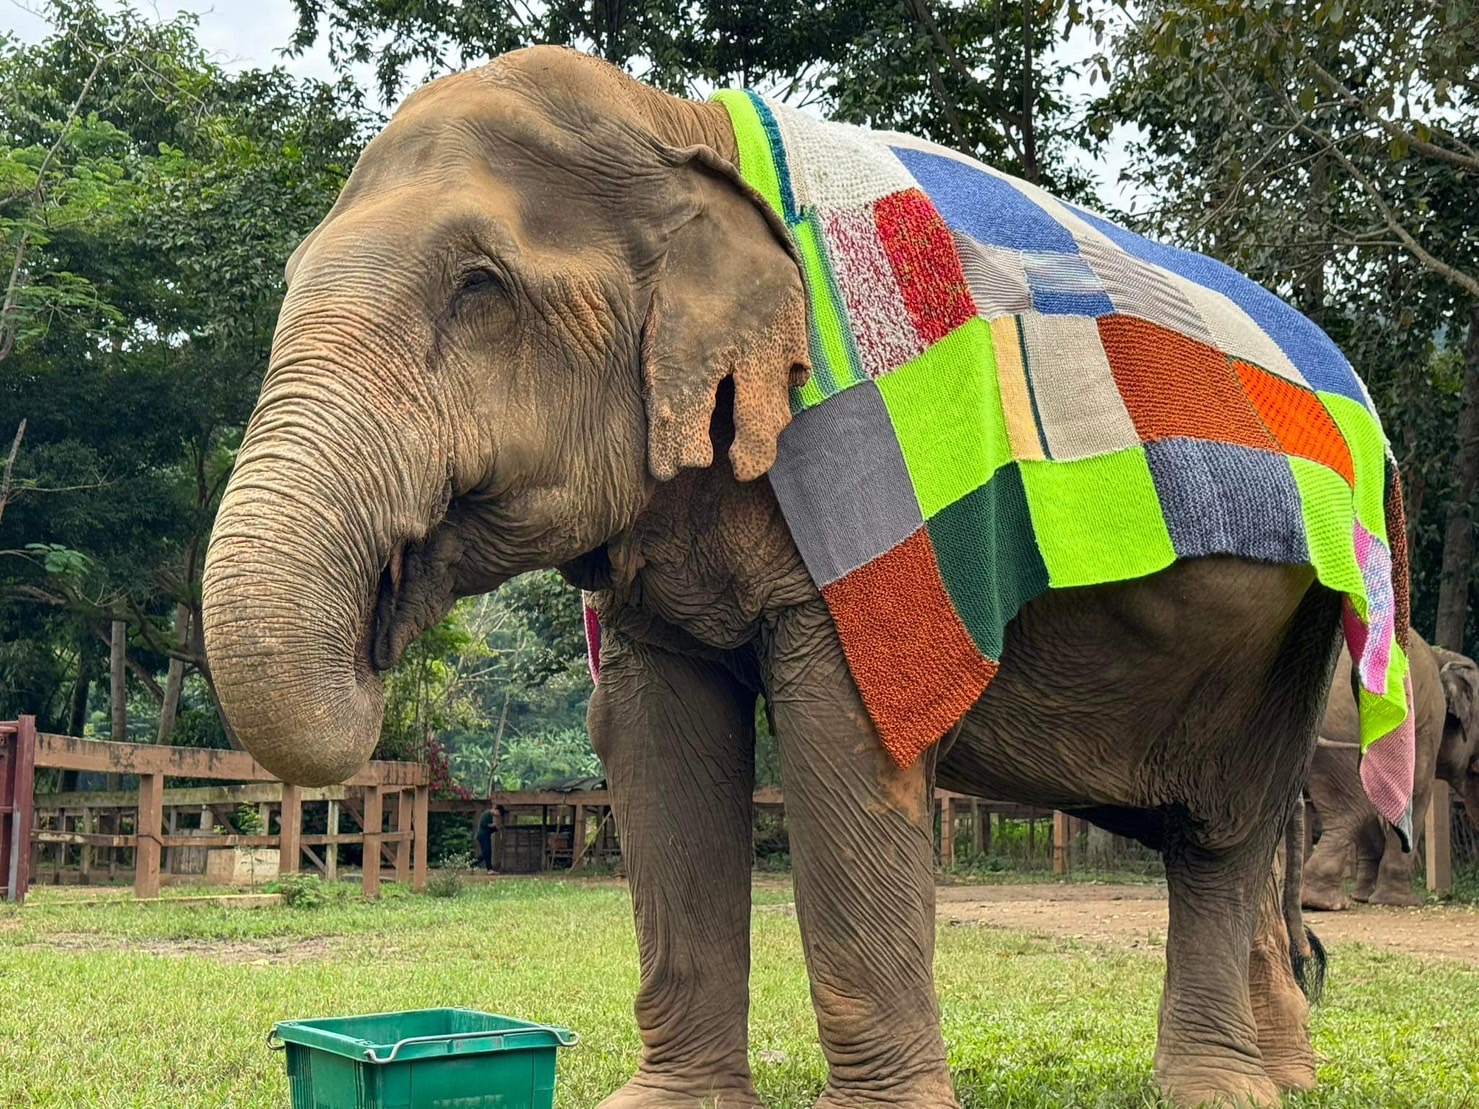 We are deeply grateful for the generous donation of elephant blankets from the ladies at Sister on Samui.